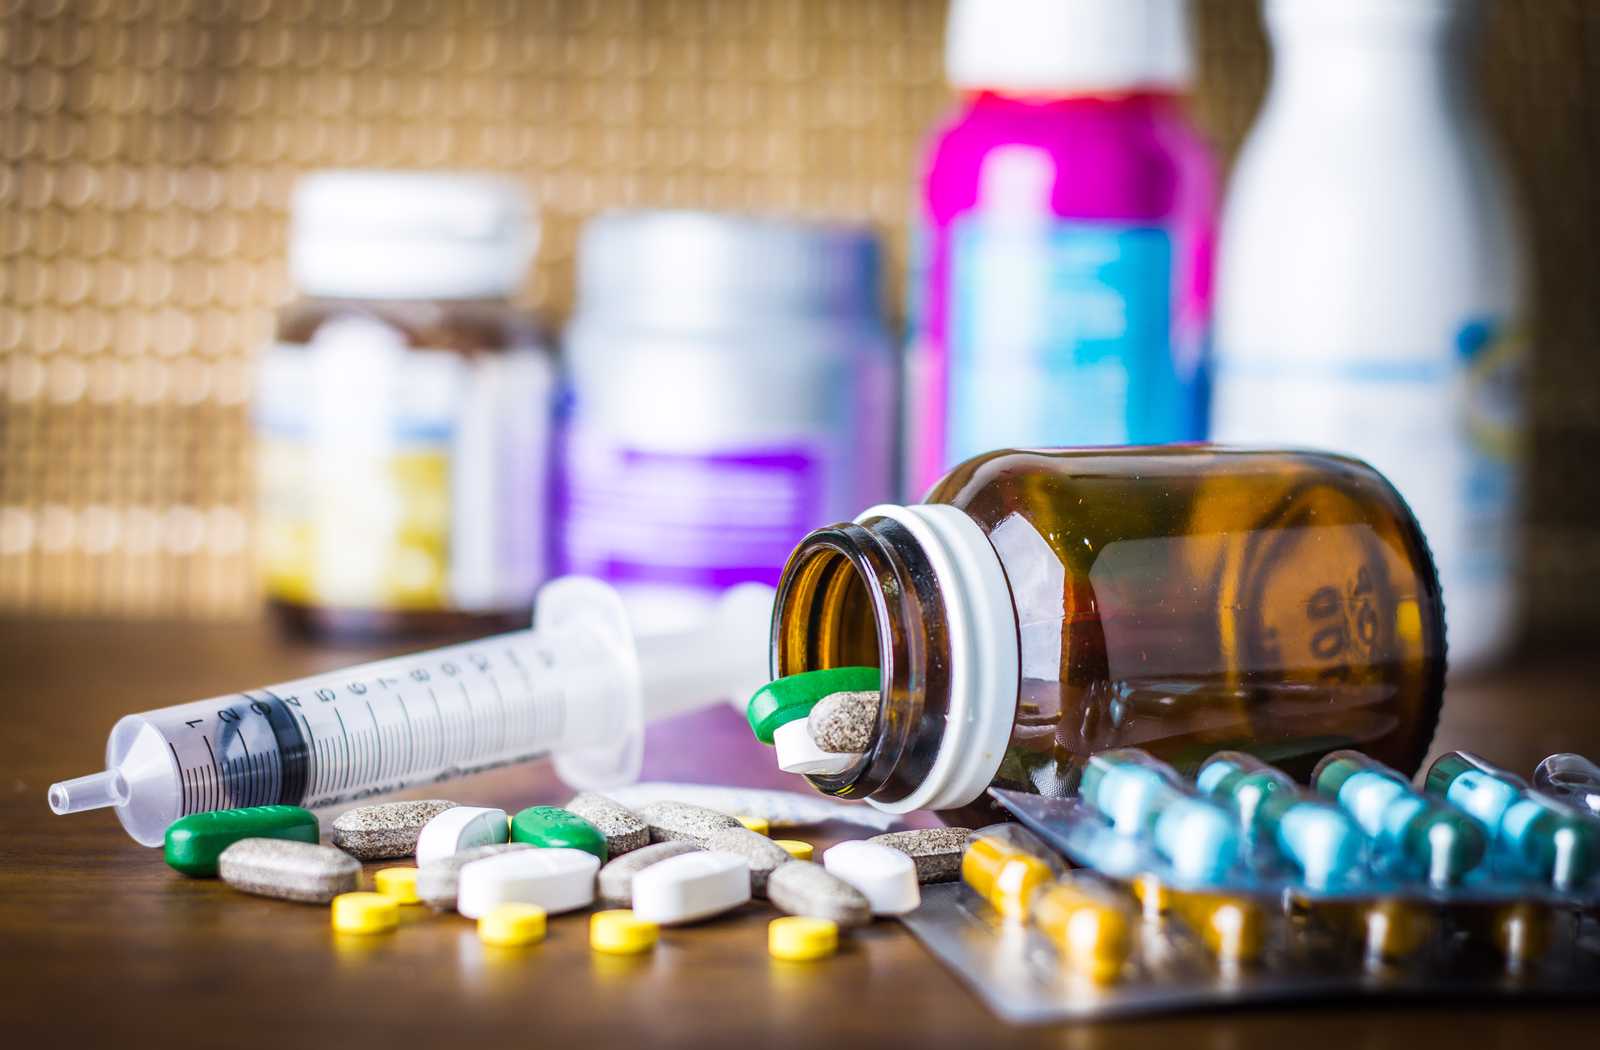 assortment of medication spilling onto wood table with bright pink and white bottles out of focus in the background